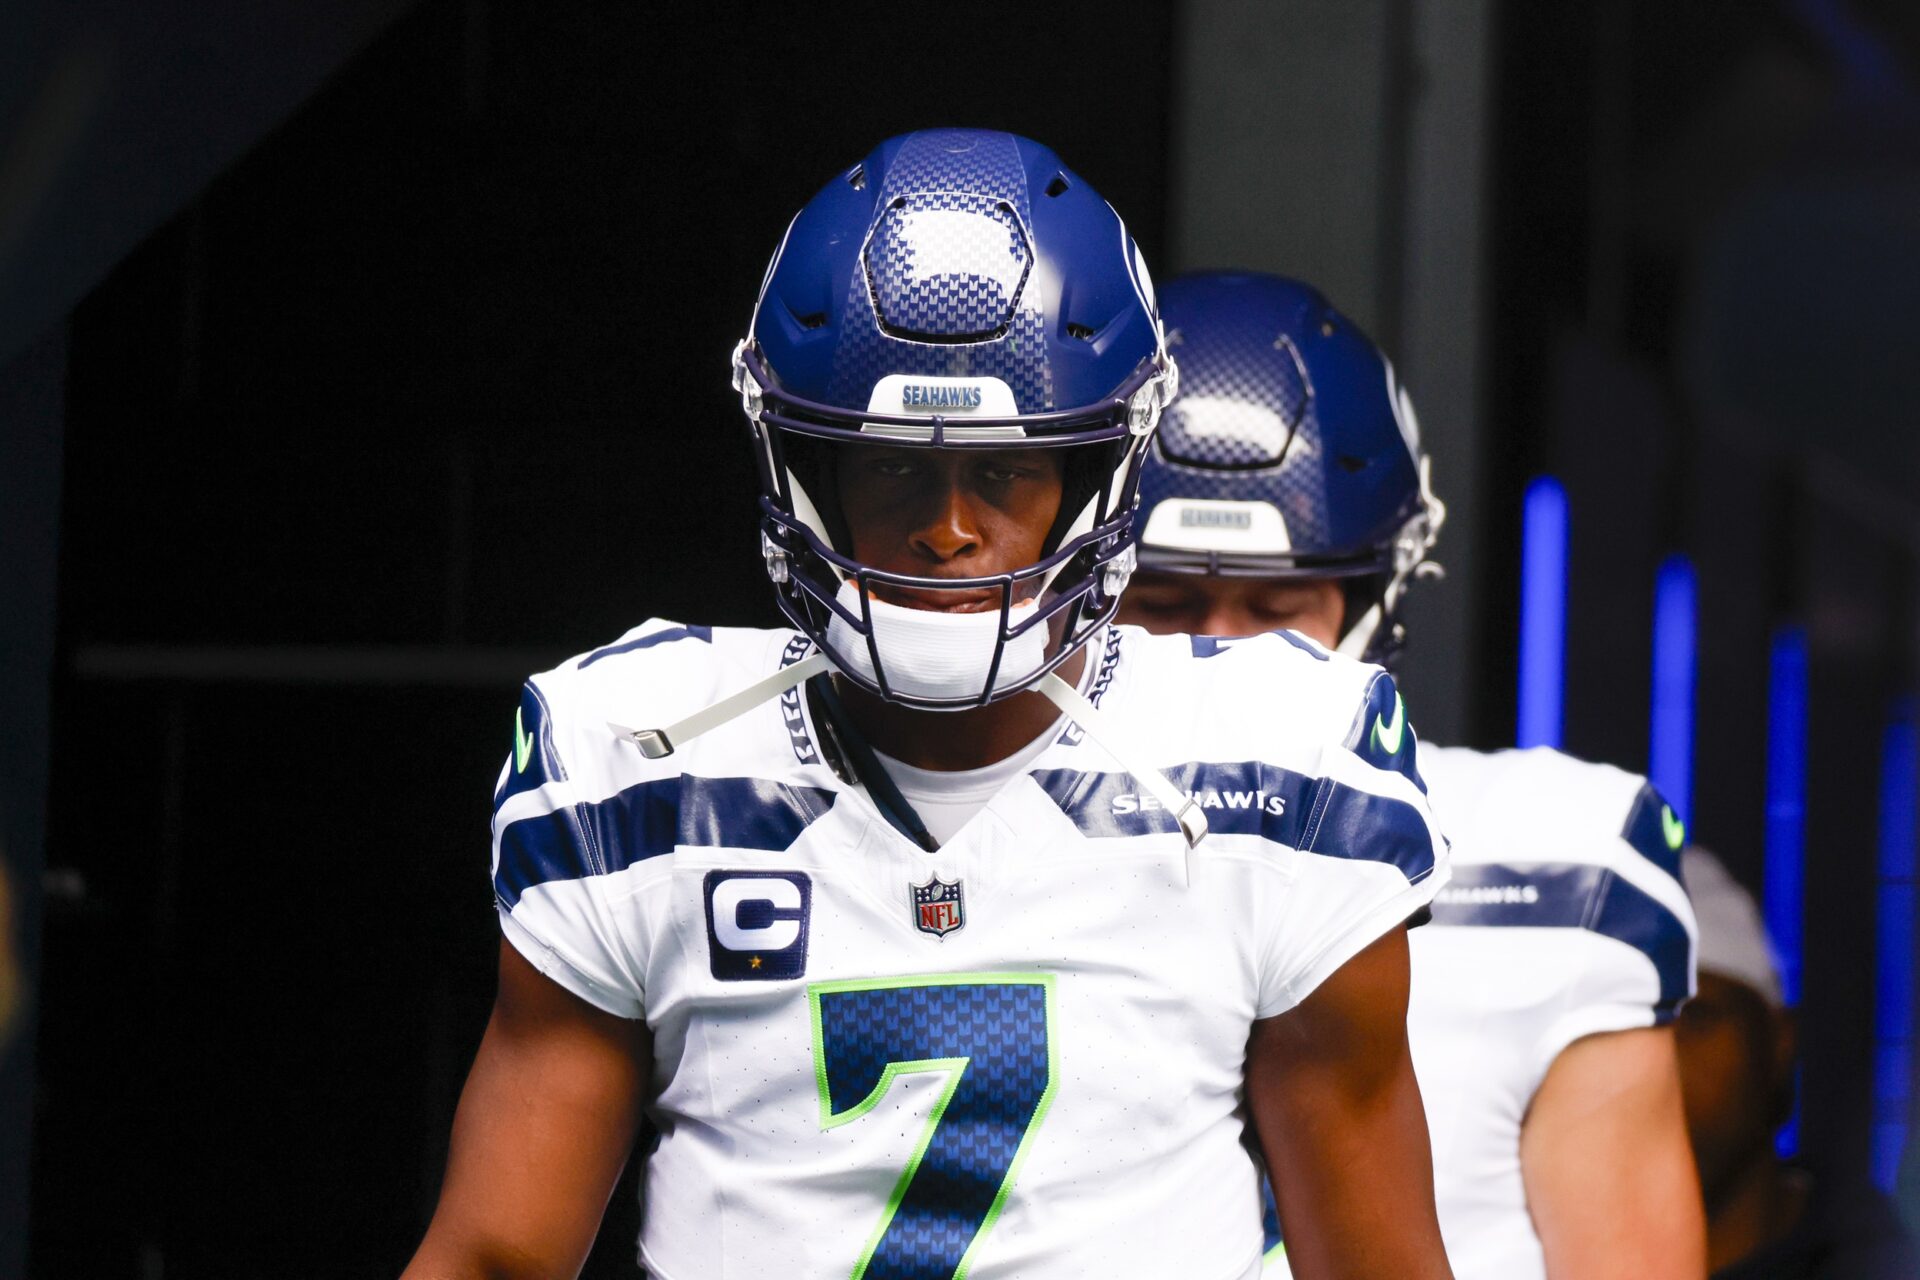 Seattle Seahawks QB Geno Smith leads his team to the field.